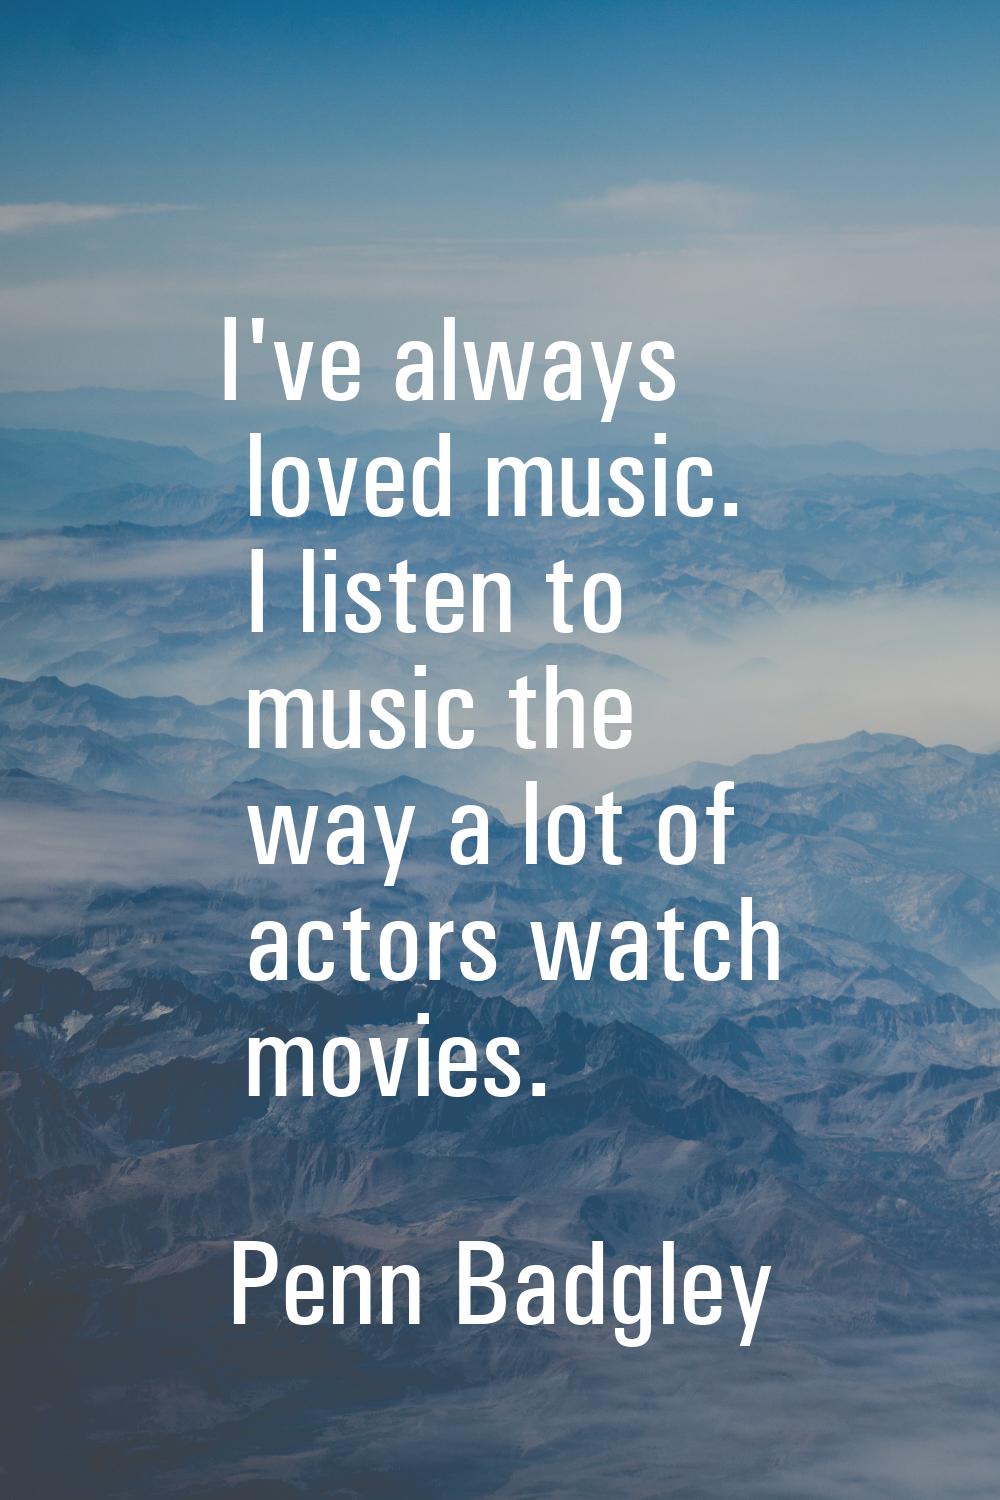 I've always loved music. I listen to music the way a lot of actors watch movies.